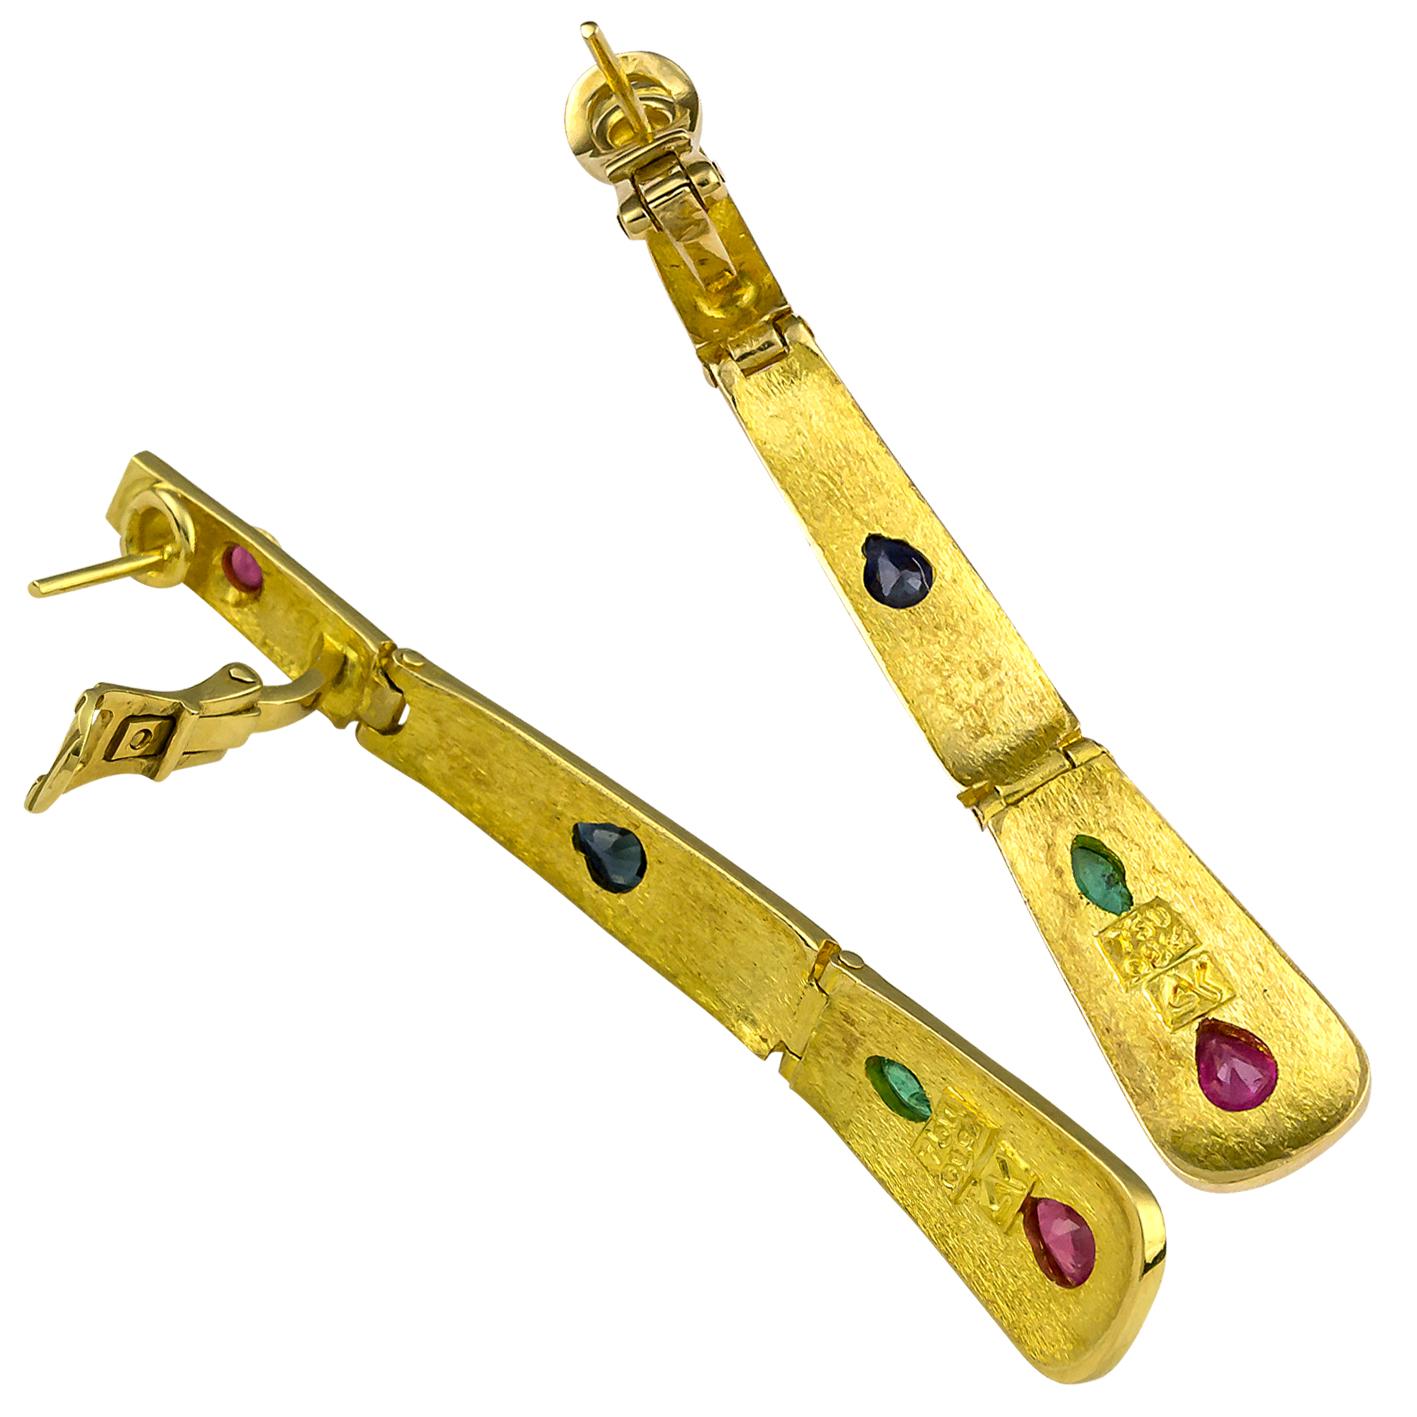 S.Georgios designer Earrings 18 Karat yellow gold all handmade and microscopically decorated with granulation workmanship and a unique velvet finish on the background. They feature Rubies, Sapphires and Emeralds total weight of 1,45 Carats and have